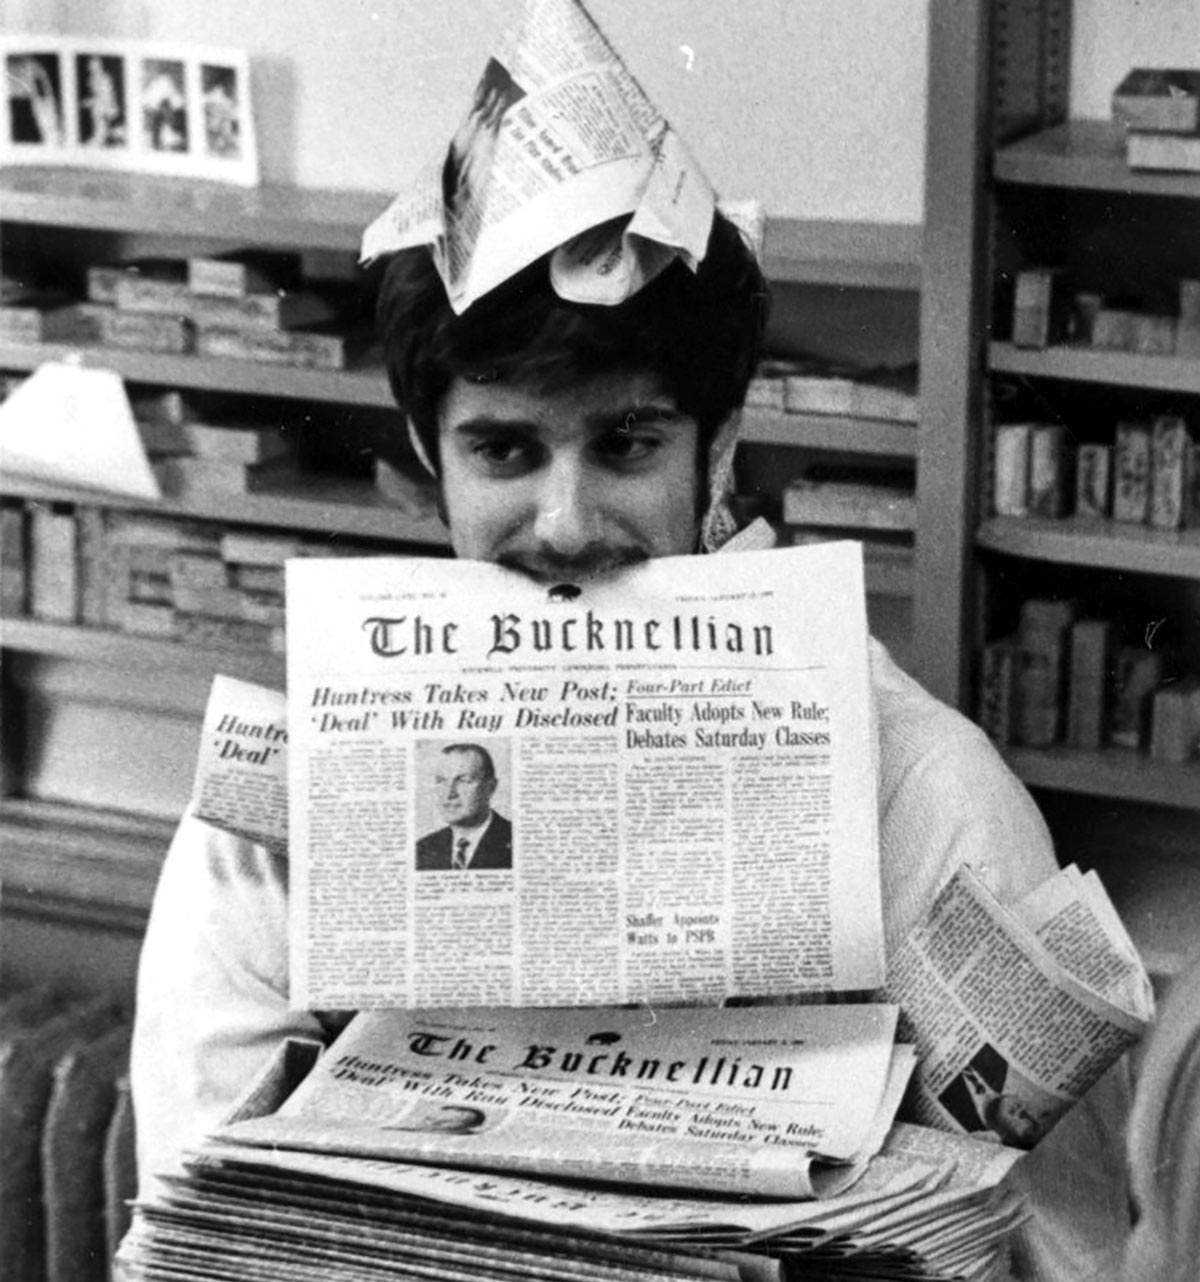 Vintage photo of a student under a stack of newspapers holding one between his teeth